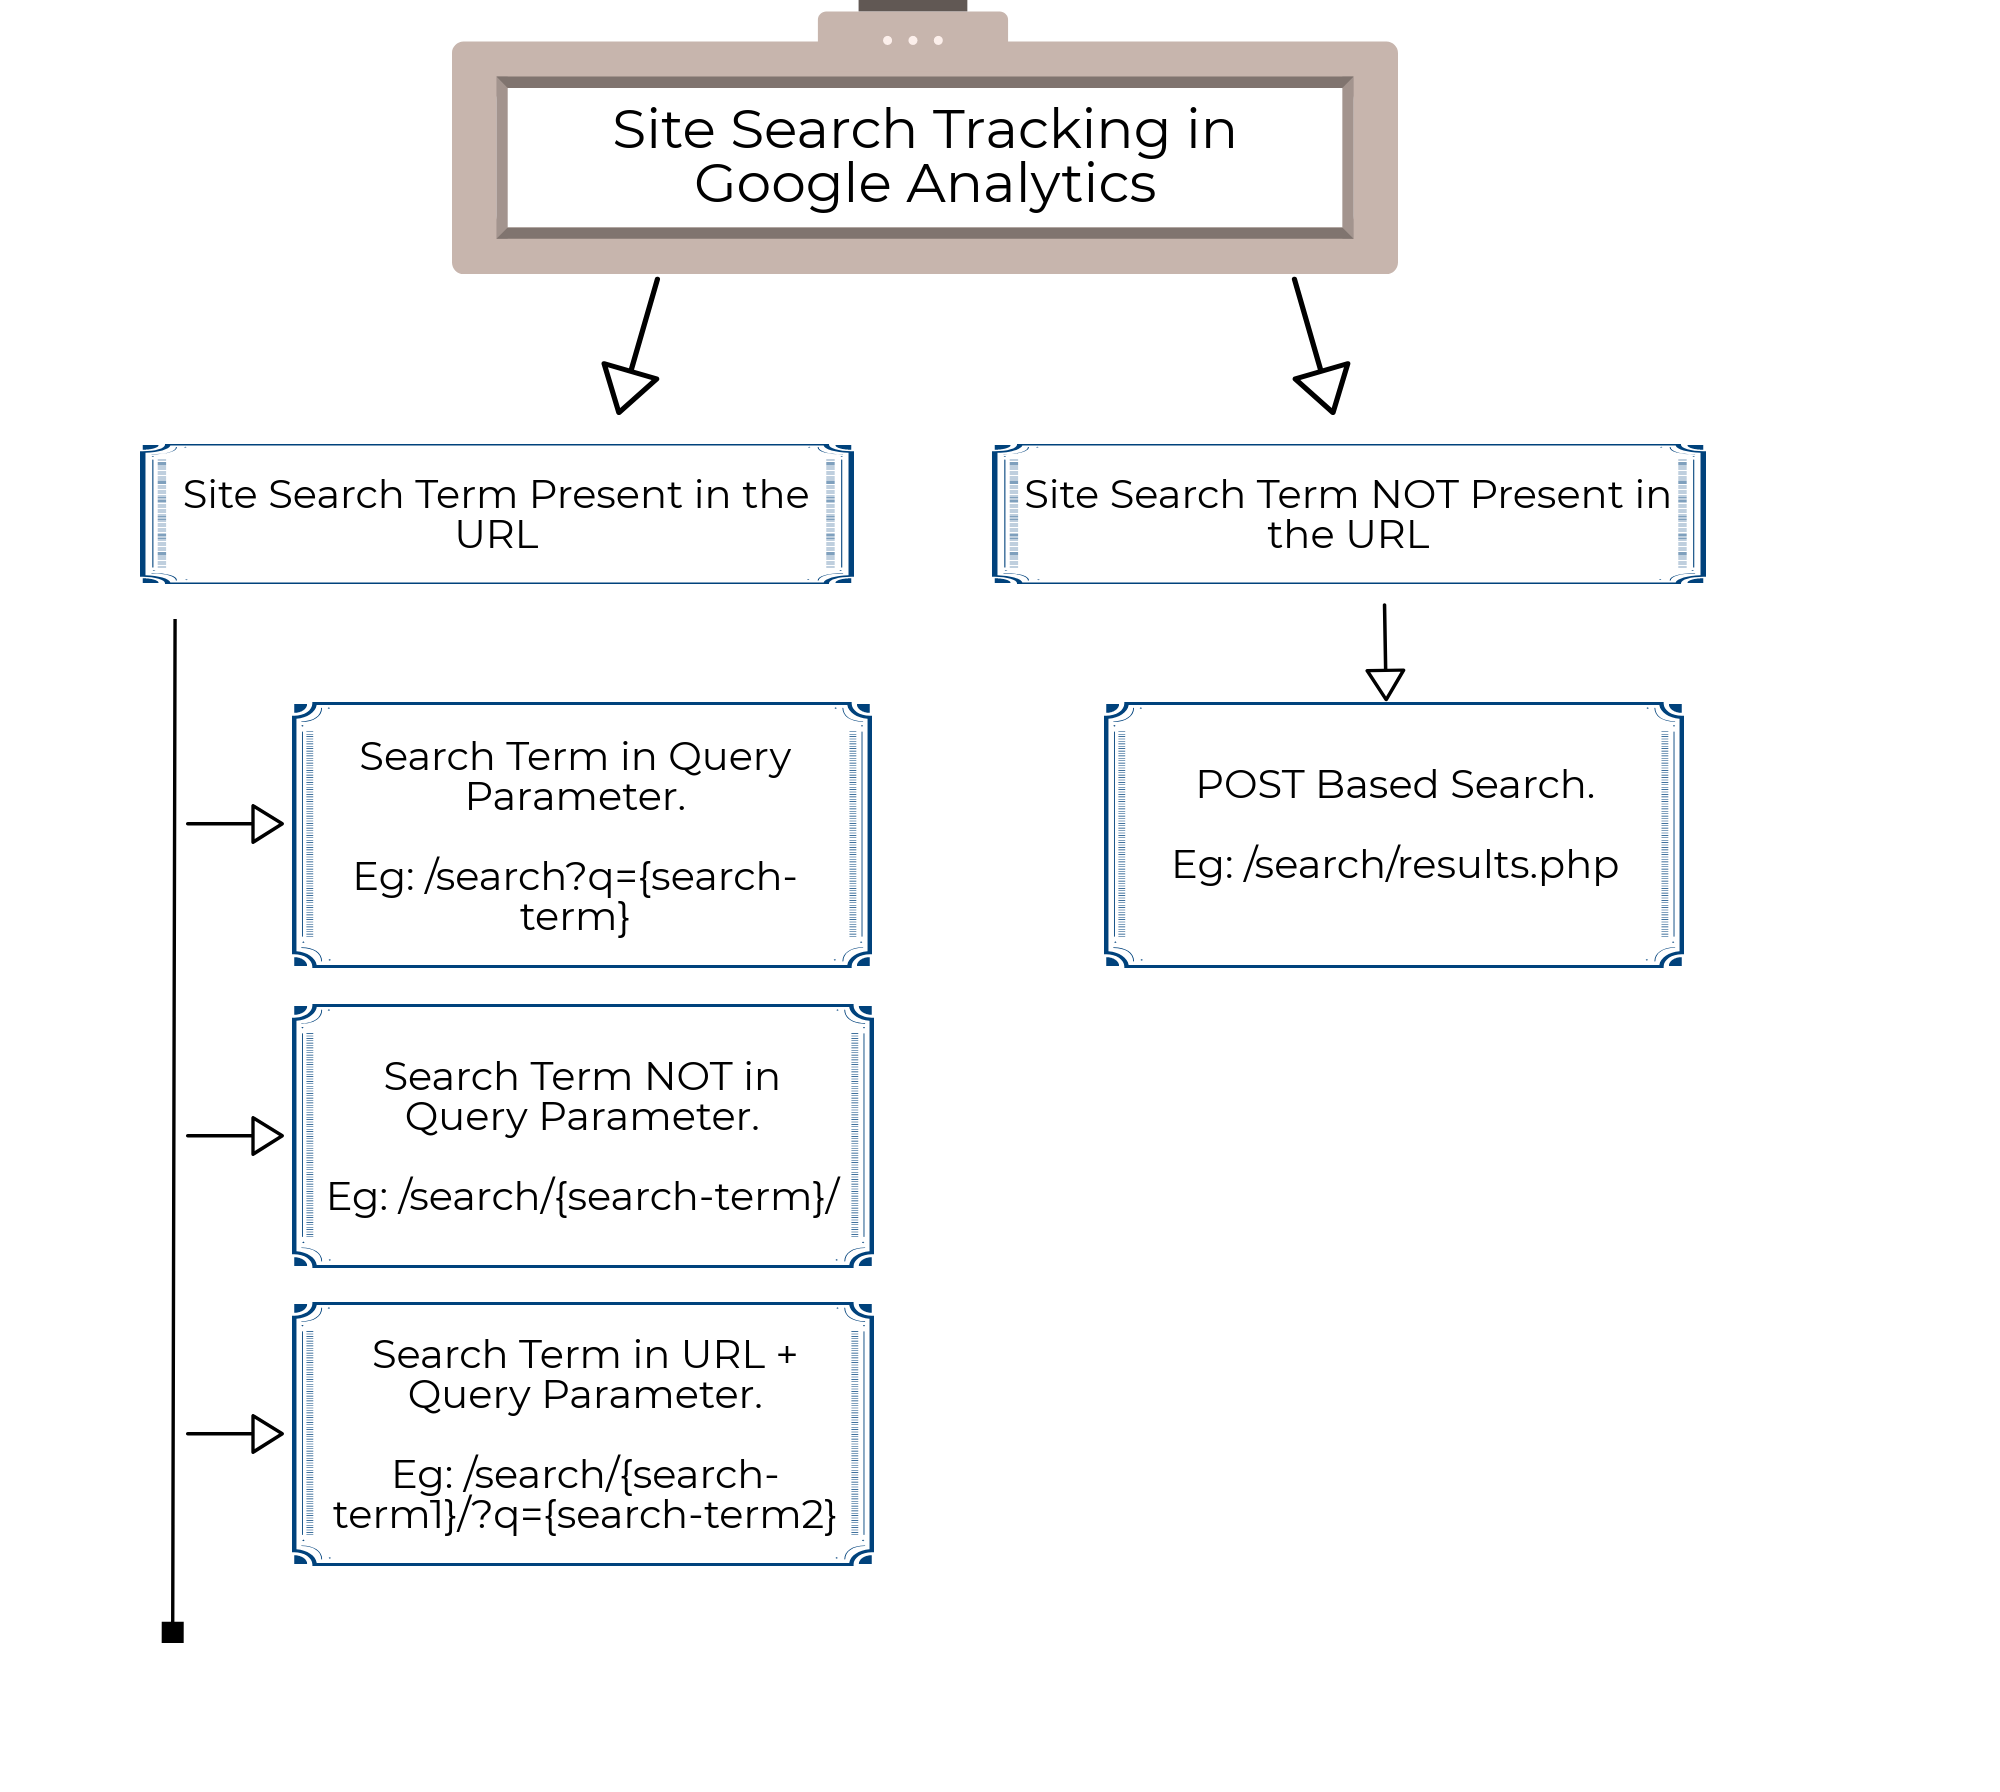 Google Analytics Site Search Tracking_Hierarchy